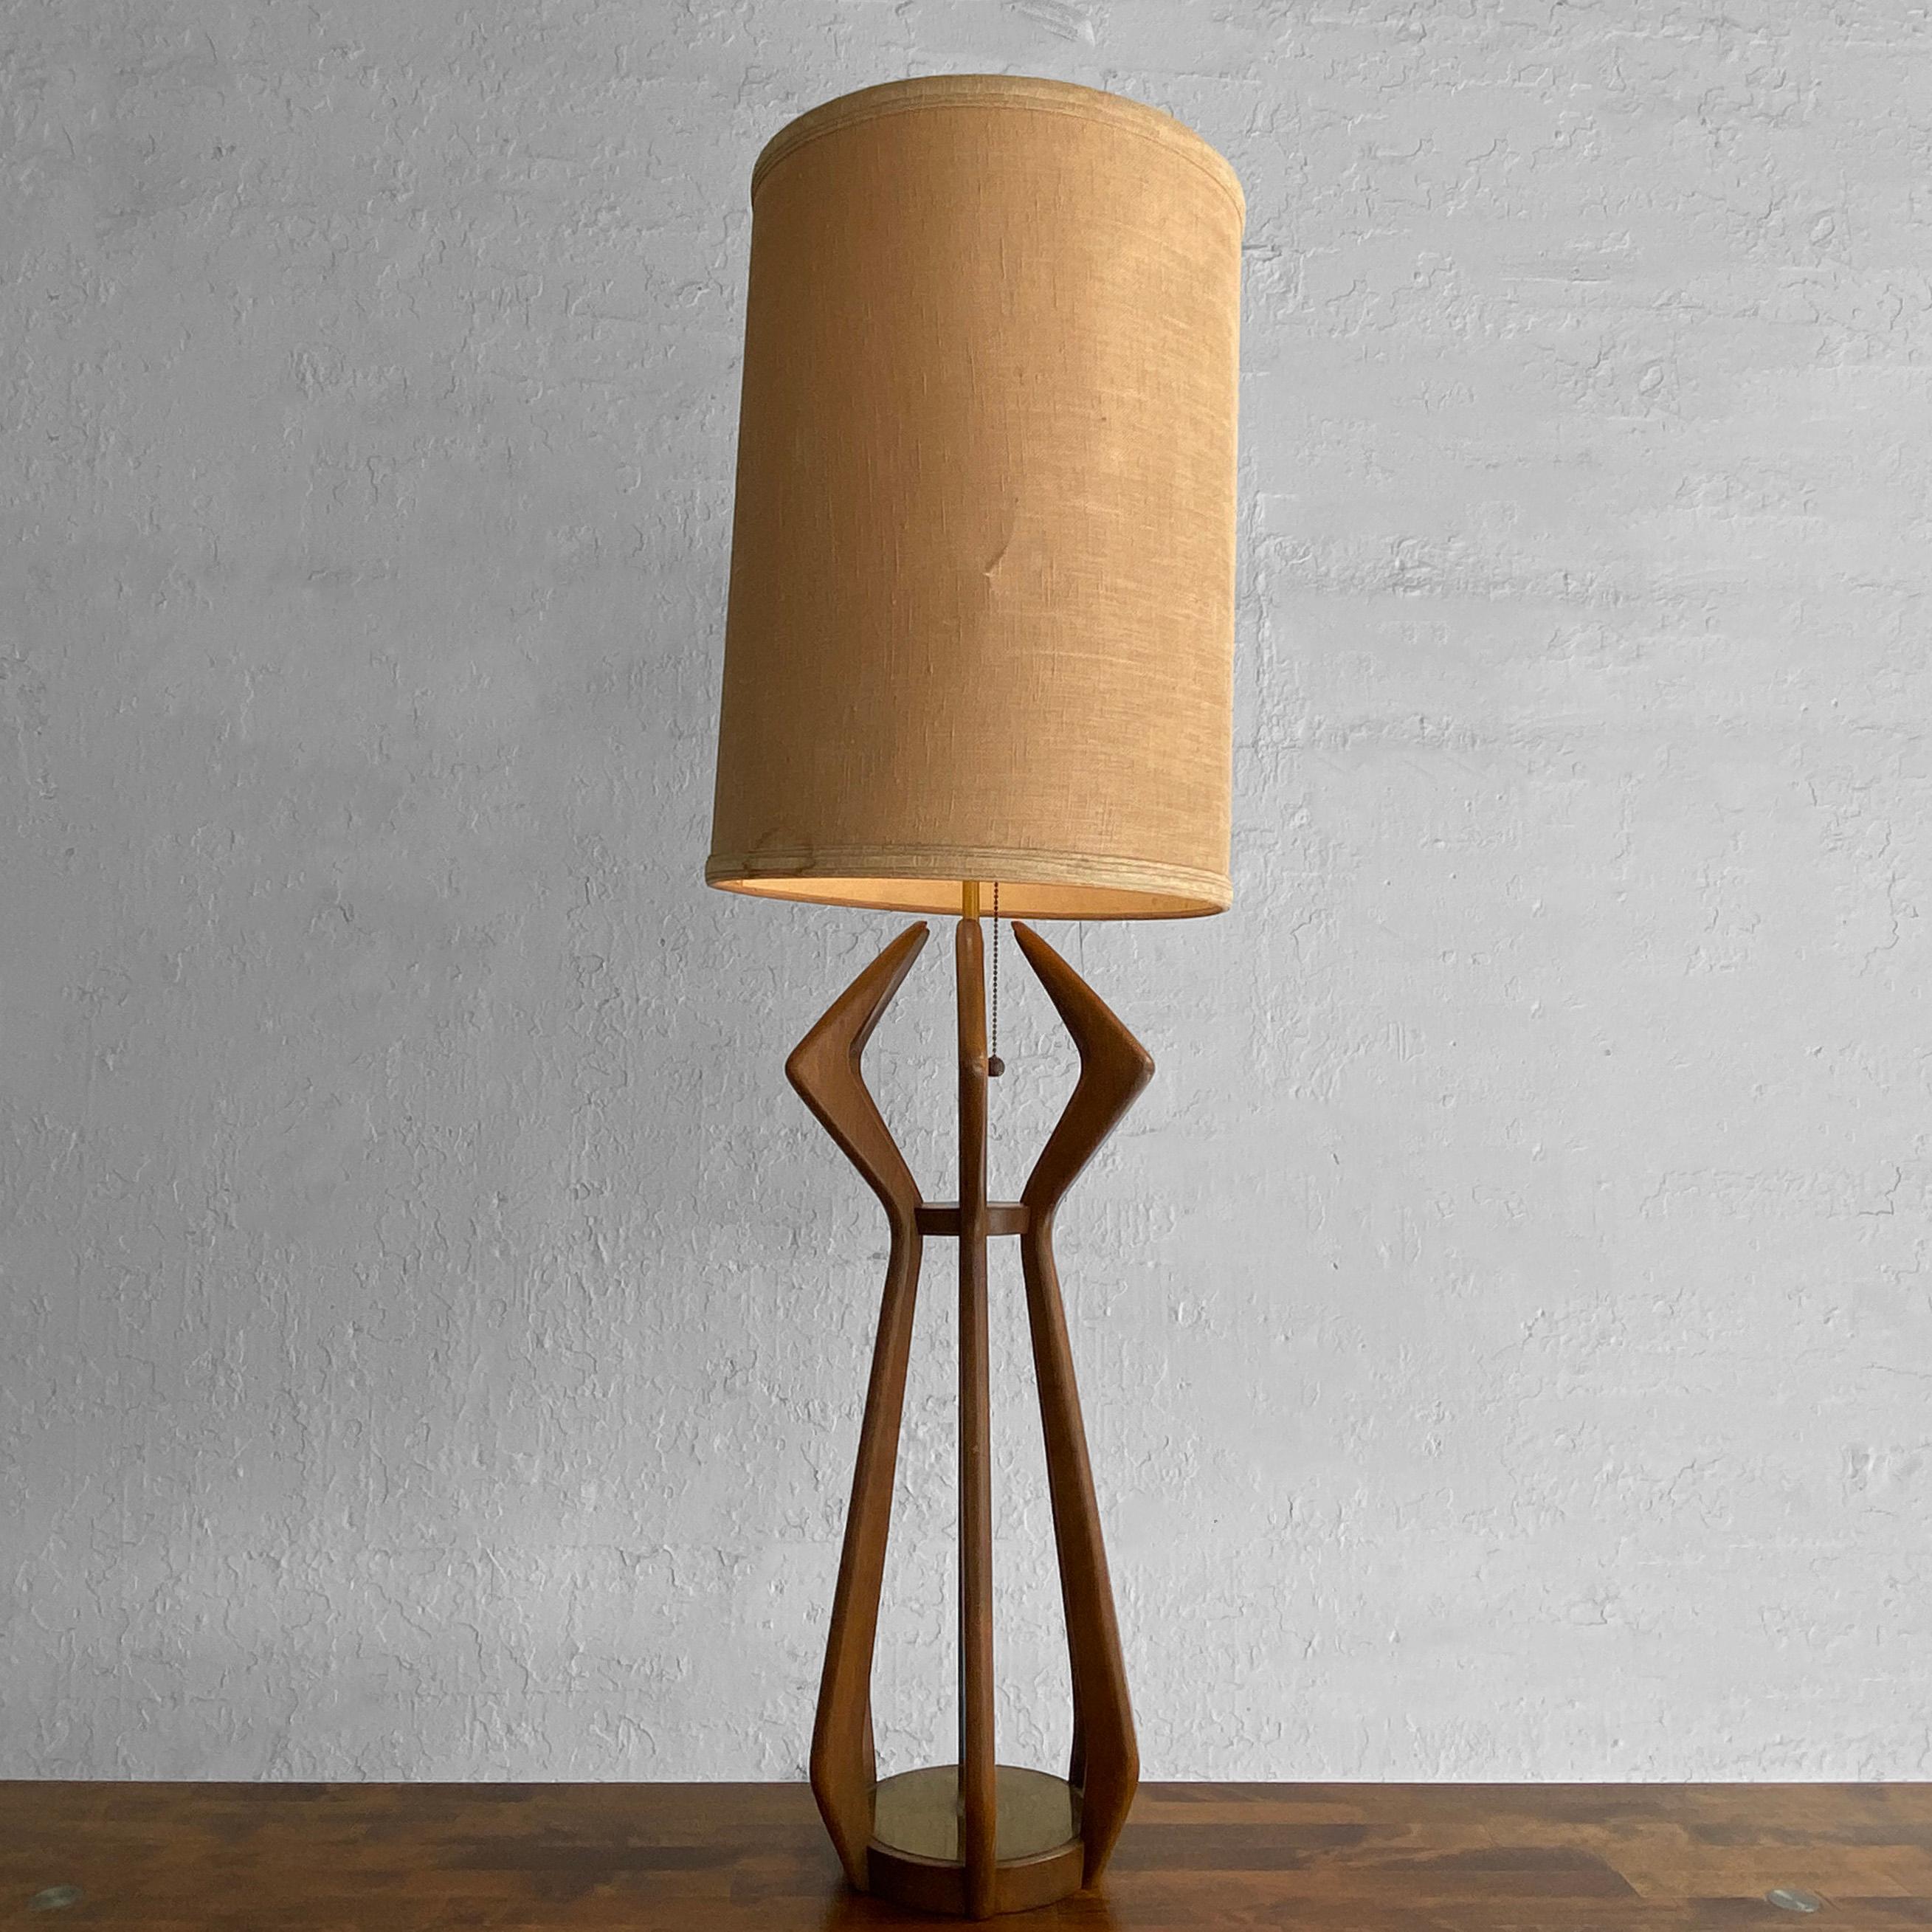 20th Century Mid-Century Modern Sculpted Walnut Table Lamp by Modeline For Sale